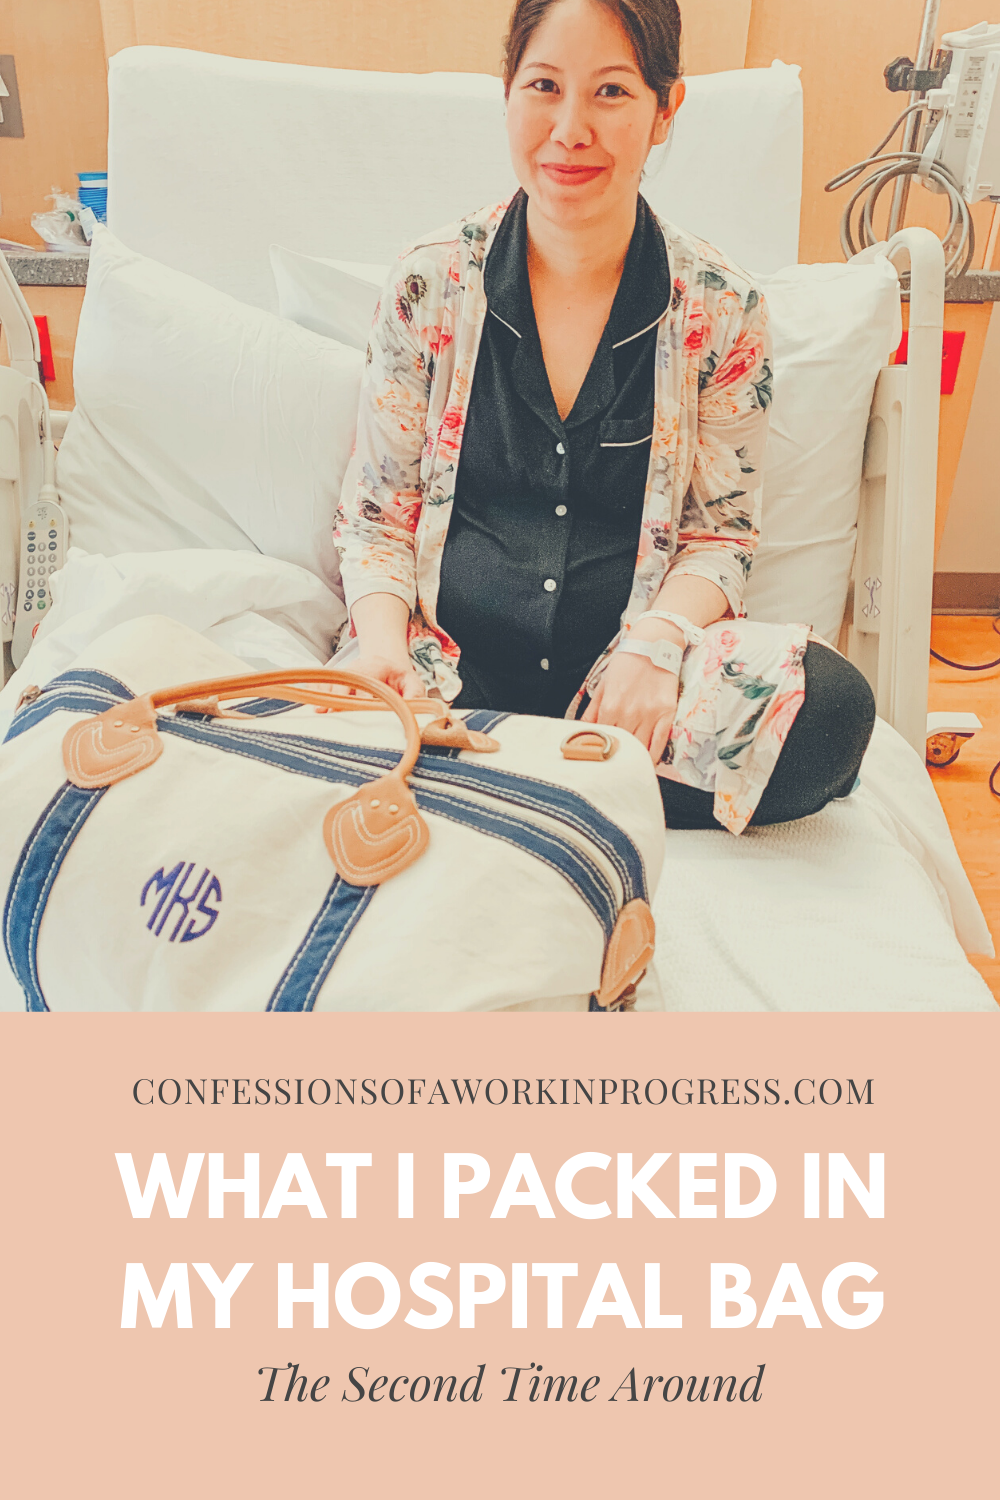 What I'm Packing in My Hospital Bag (for Baby #2)